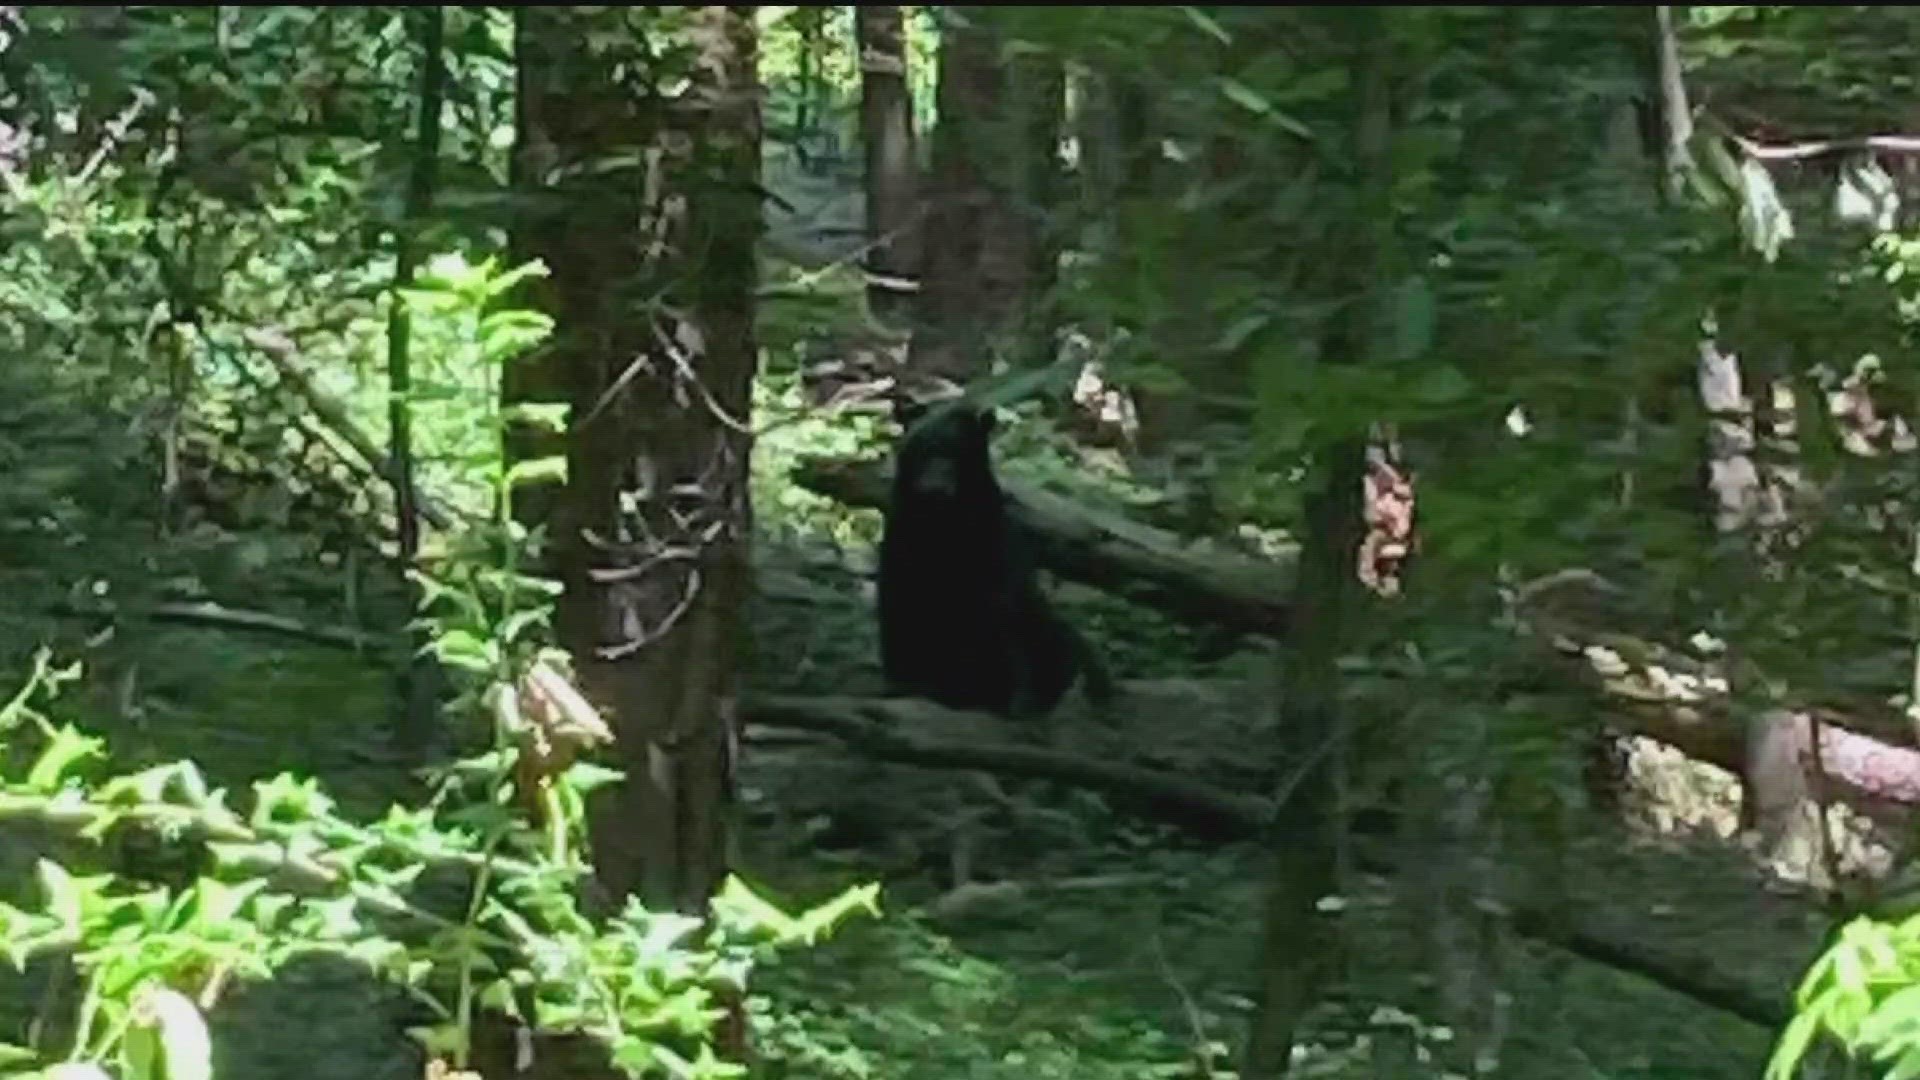 It's just the latest in a string of bear sightings, which has left people curious and scared at the same time.